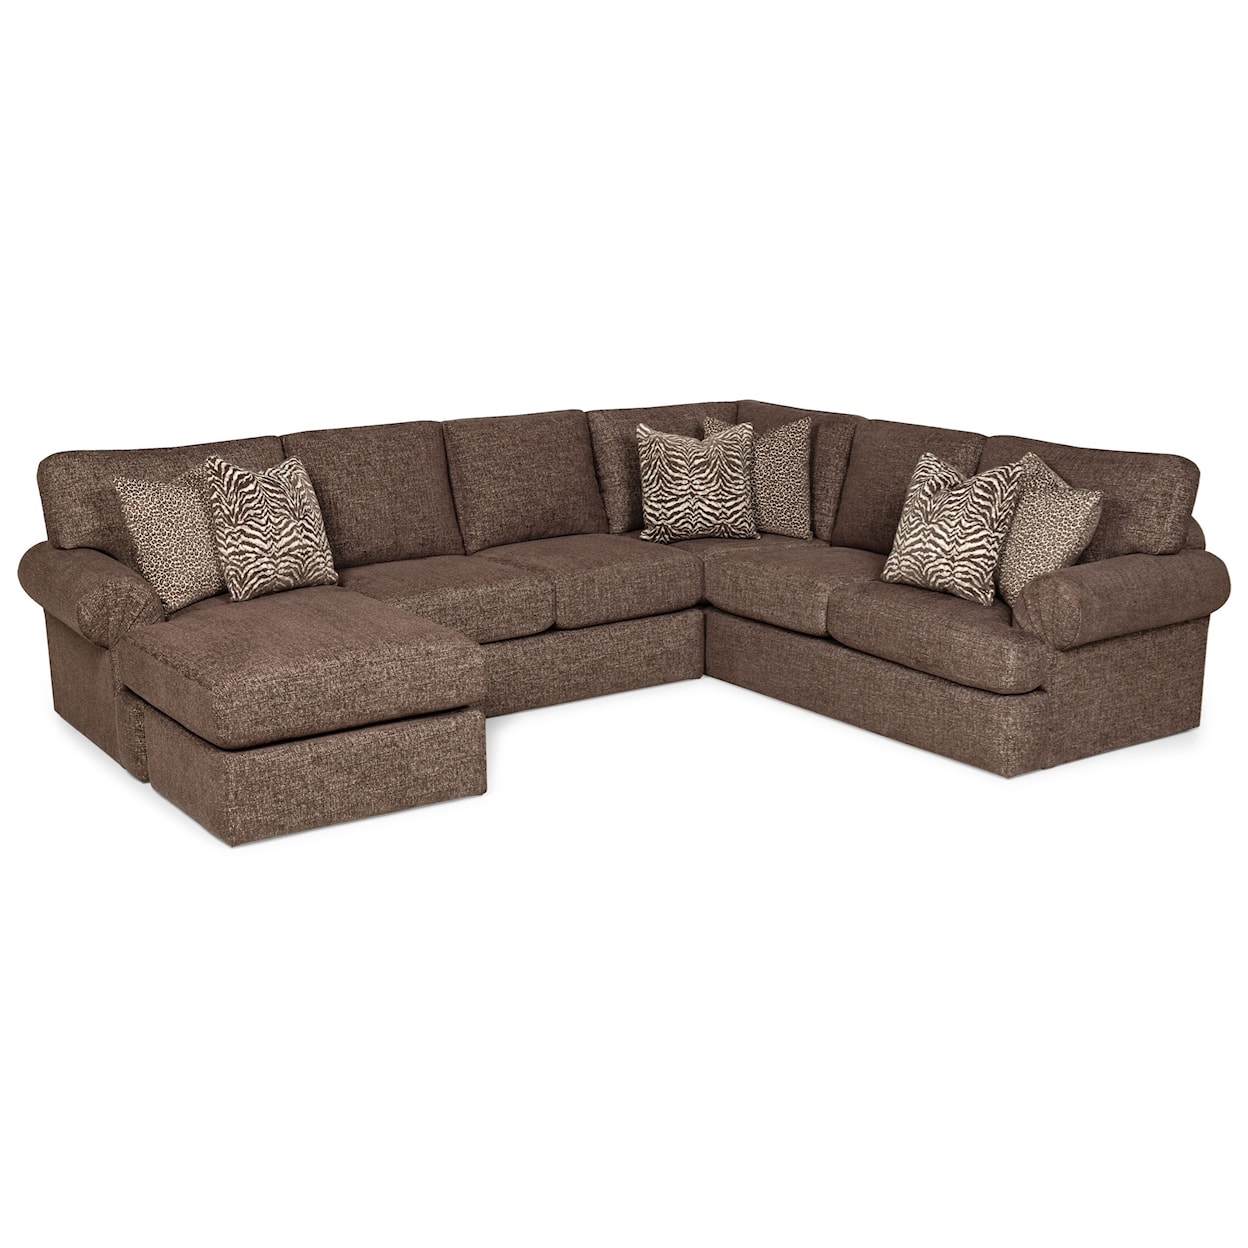 Sunset Home 371 5-Seat Sectional Sofa w/ LAF Chaise